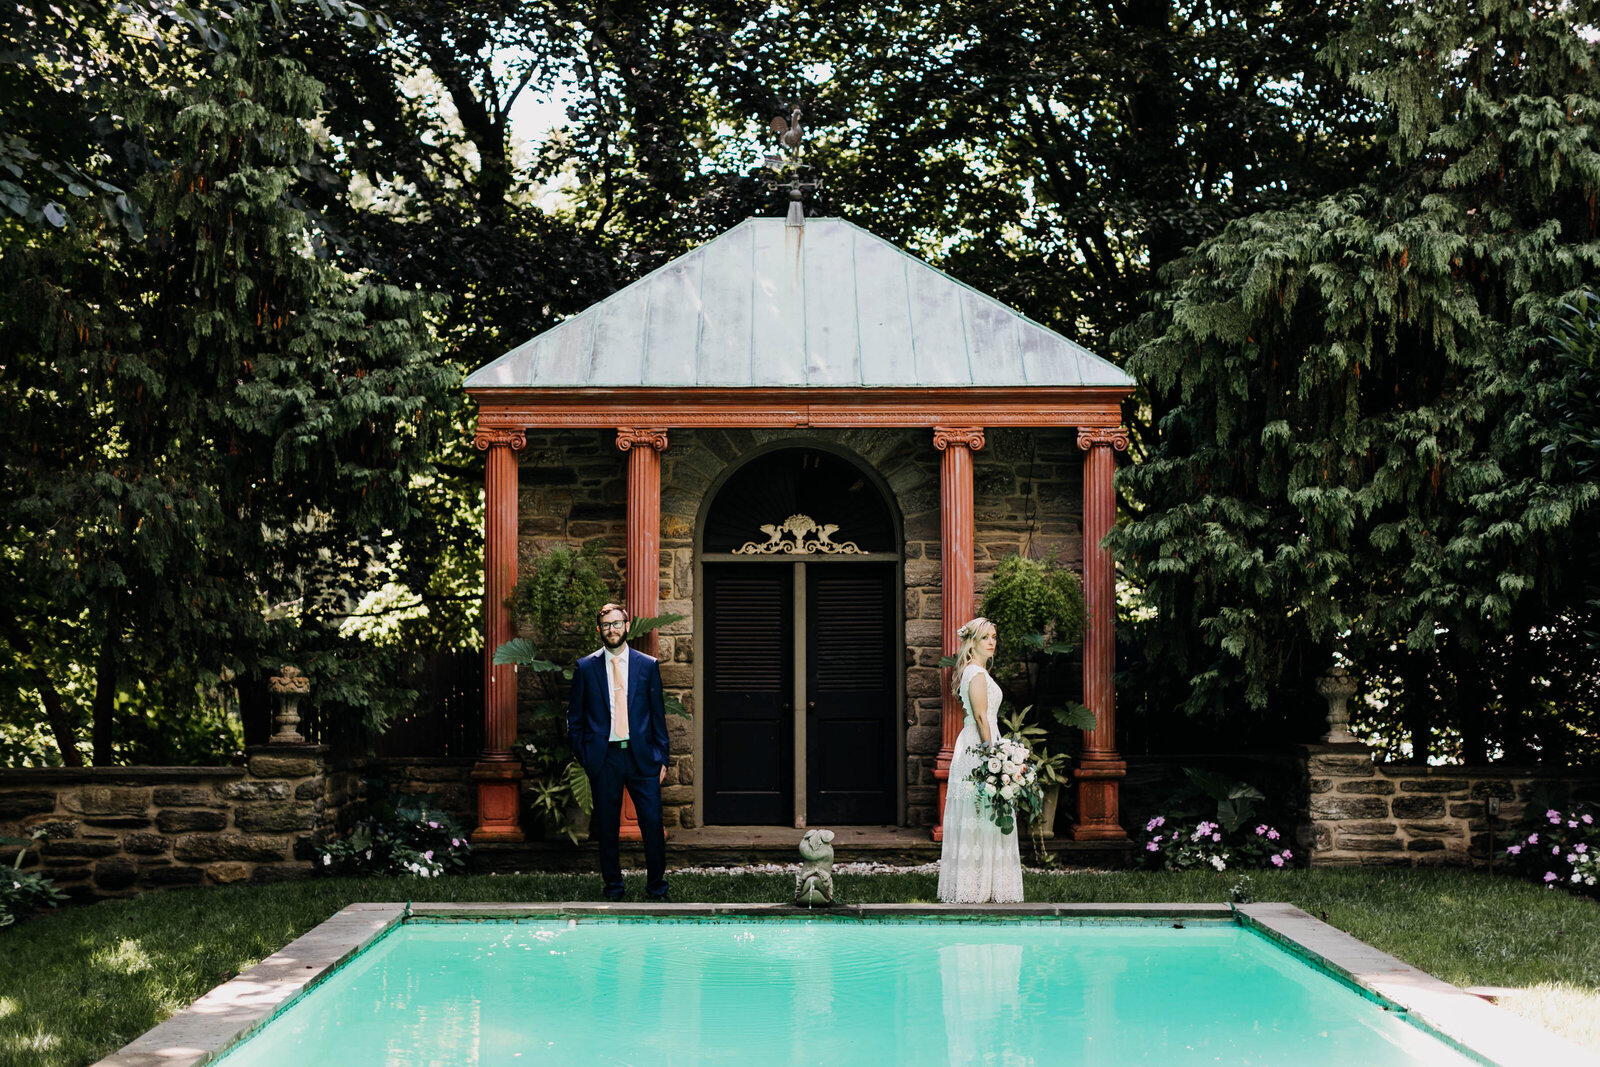 bride and groom in garden with pool